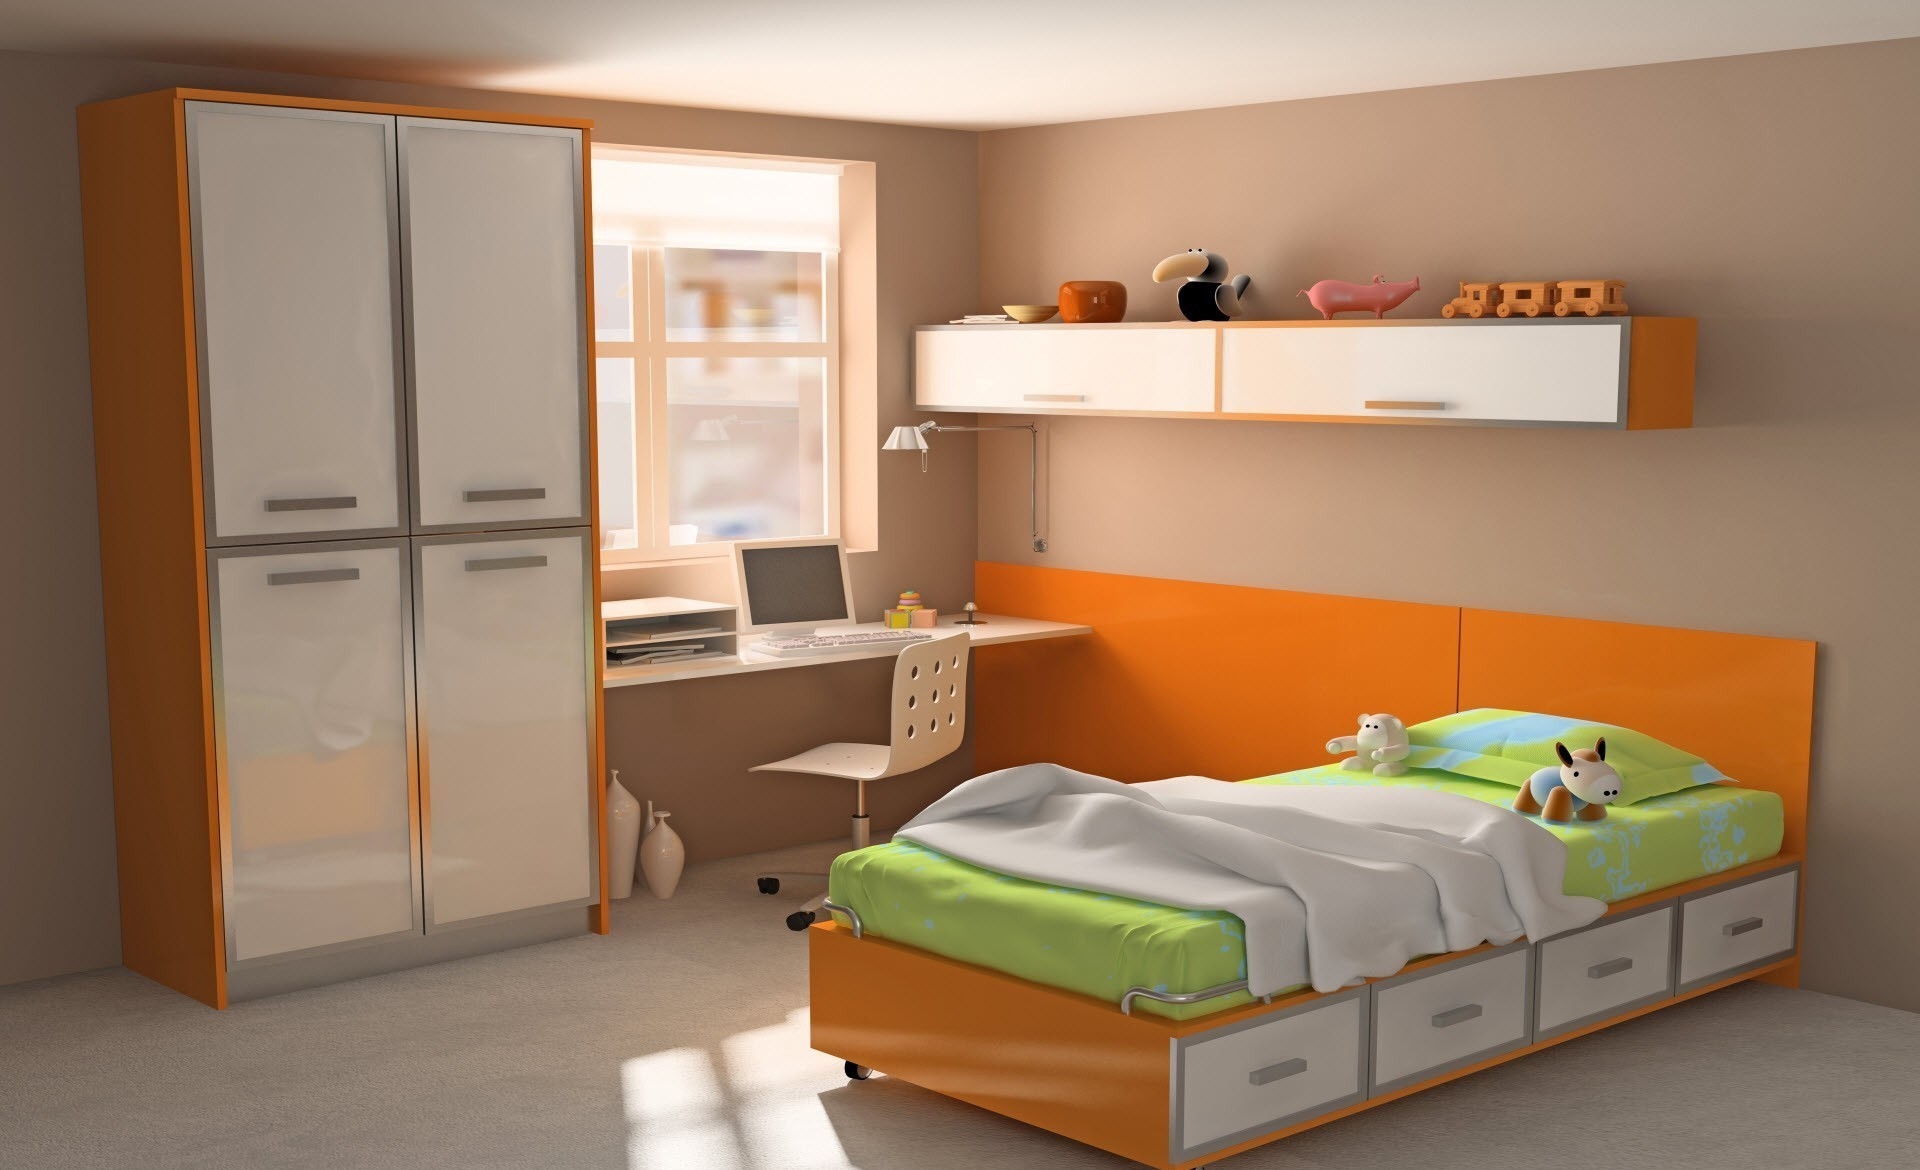 toys, interior, orange, miscellanea, miscellaneous, design, table, room, style, bed, brightly, computer, cupboard, apartment, flat, colorfully, graphically wallpaper for mobile